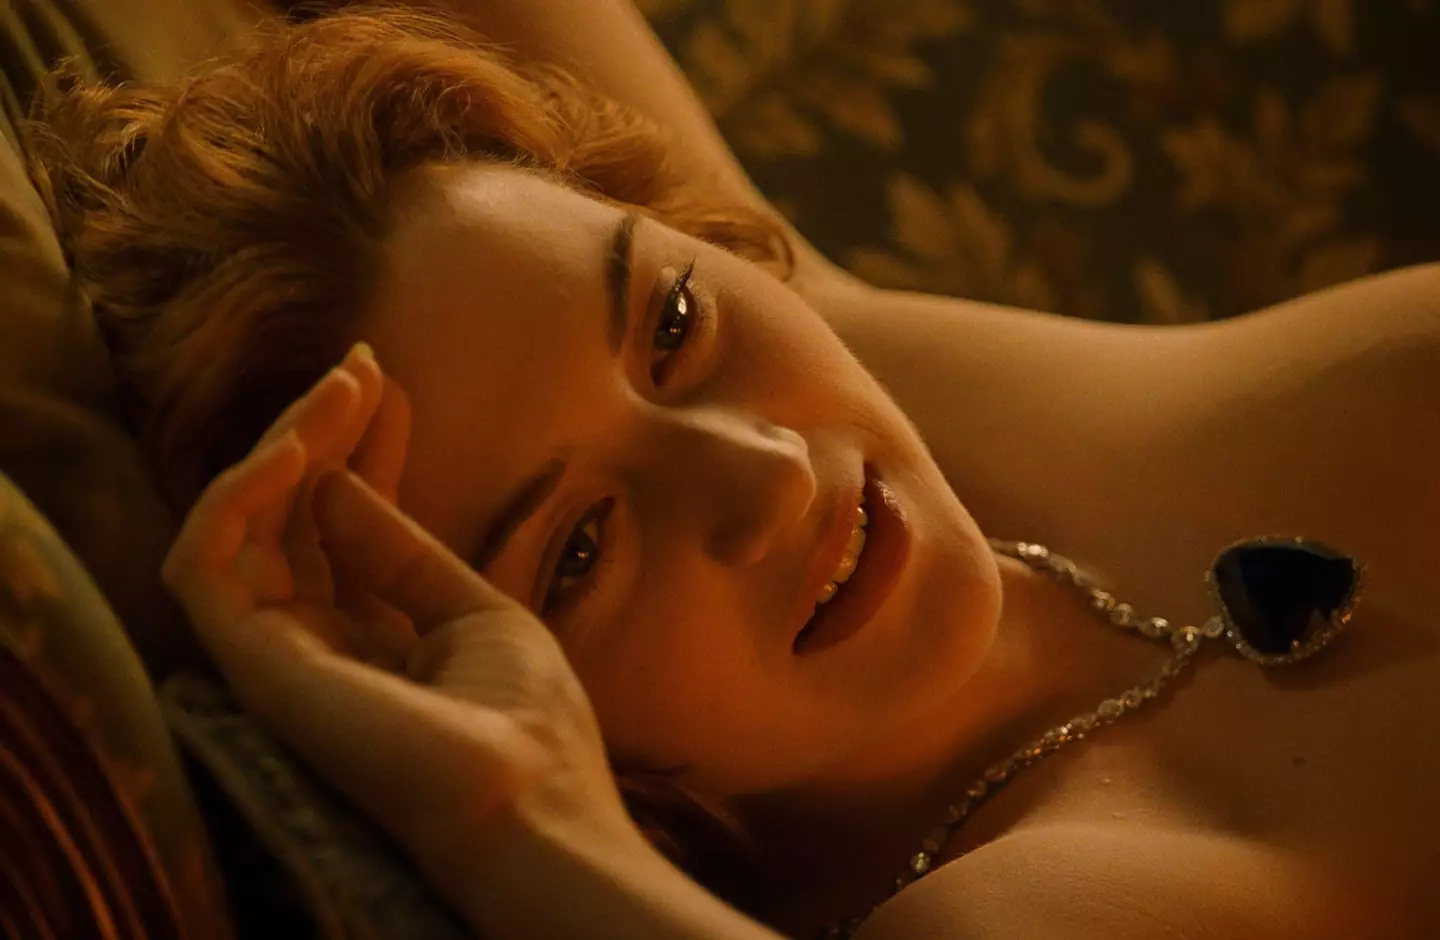 Winslet wears nothing but a necklace in the scene.